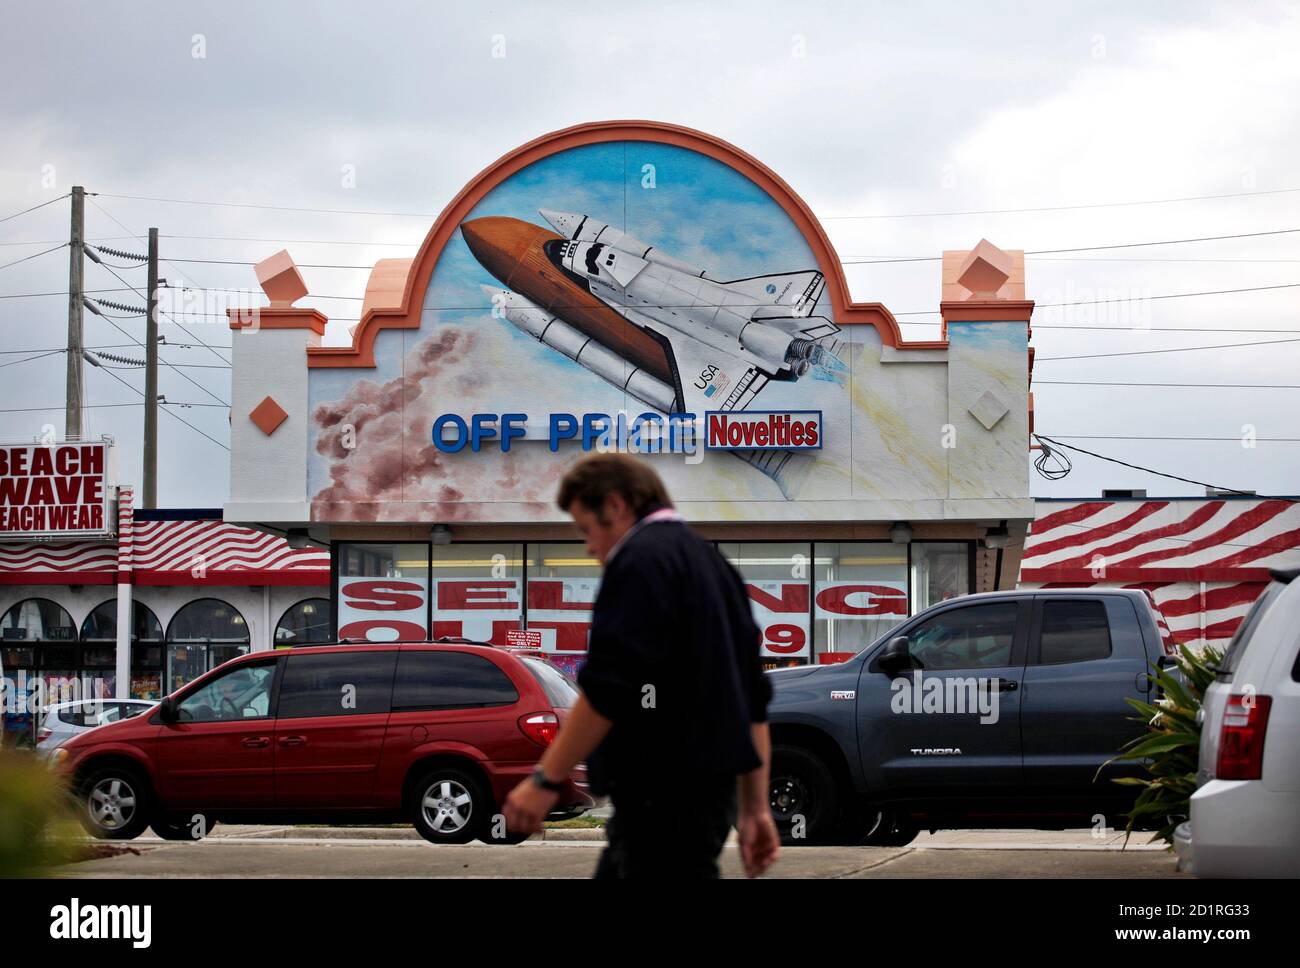 A painting of a space shuttle is seen at a local store in Cocoa Beach, Florida April 15, 2010. President Barack Obama said on Thursday he expects the United States to send astronauts to an asteroid and a manned mission to Mars by the mid-2030s, as he defended his revamped U.S. space policy. The White House on Wednesday defended President Obama's new space policy after Apollo 11 hero Neil Armstrong and other astronauts called it a step-down that would make NASA's program dependent on Russian goodwill.  REUTERS/Carlos Barria (UNITED STATES - Tags: POLITICS SCI TECH) Stock Photo